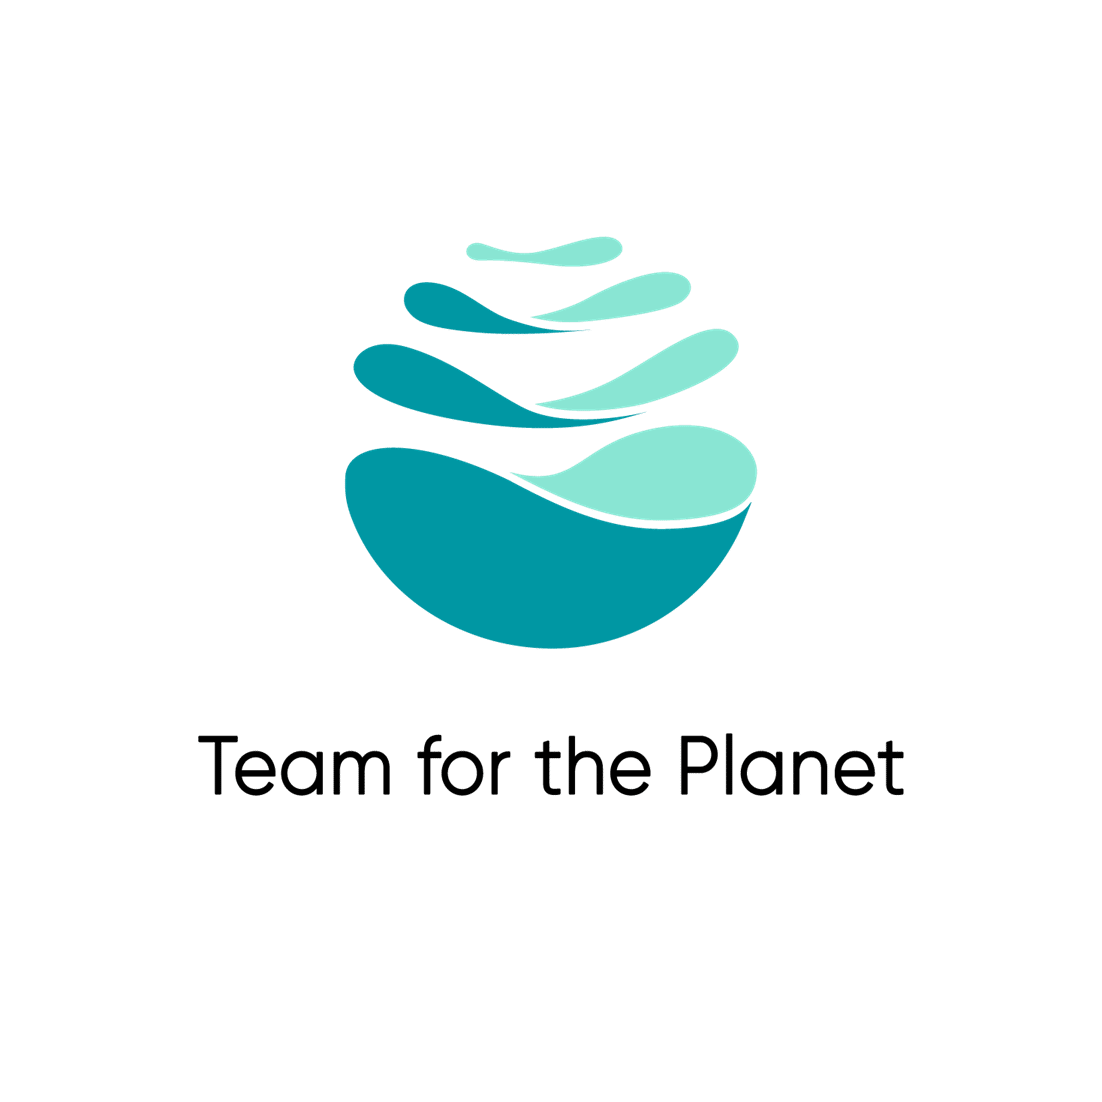 Team for the Planet